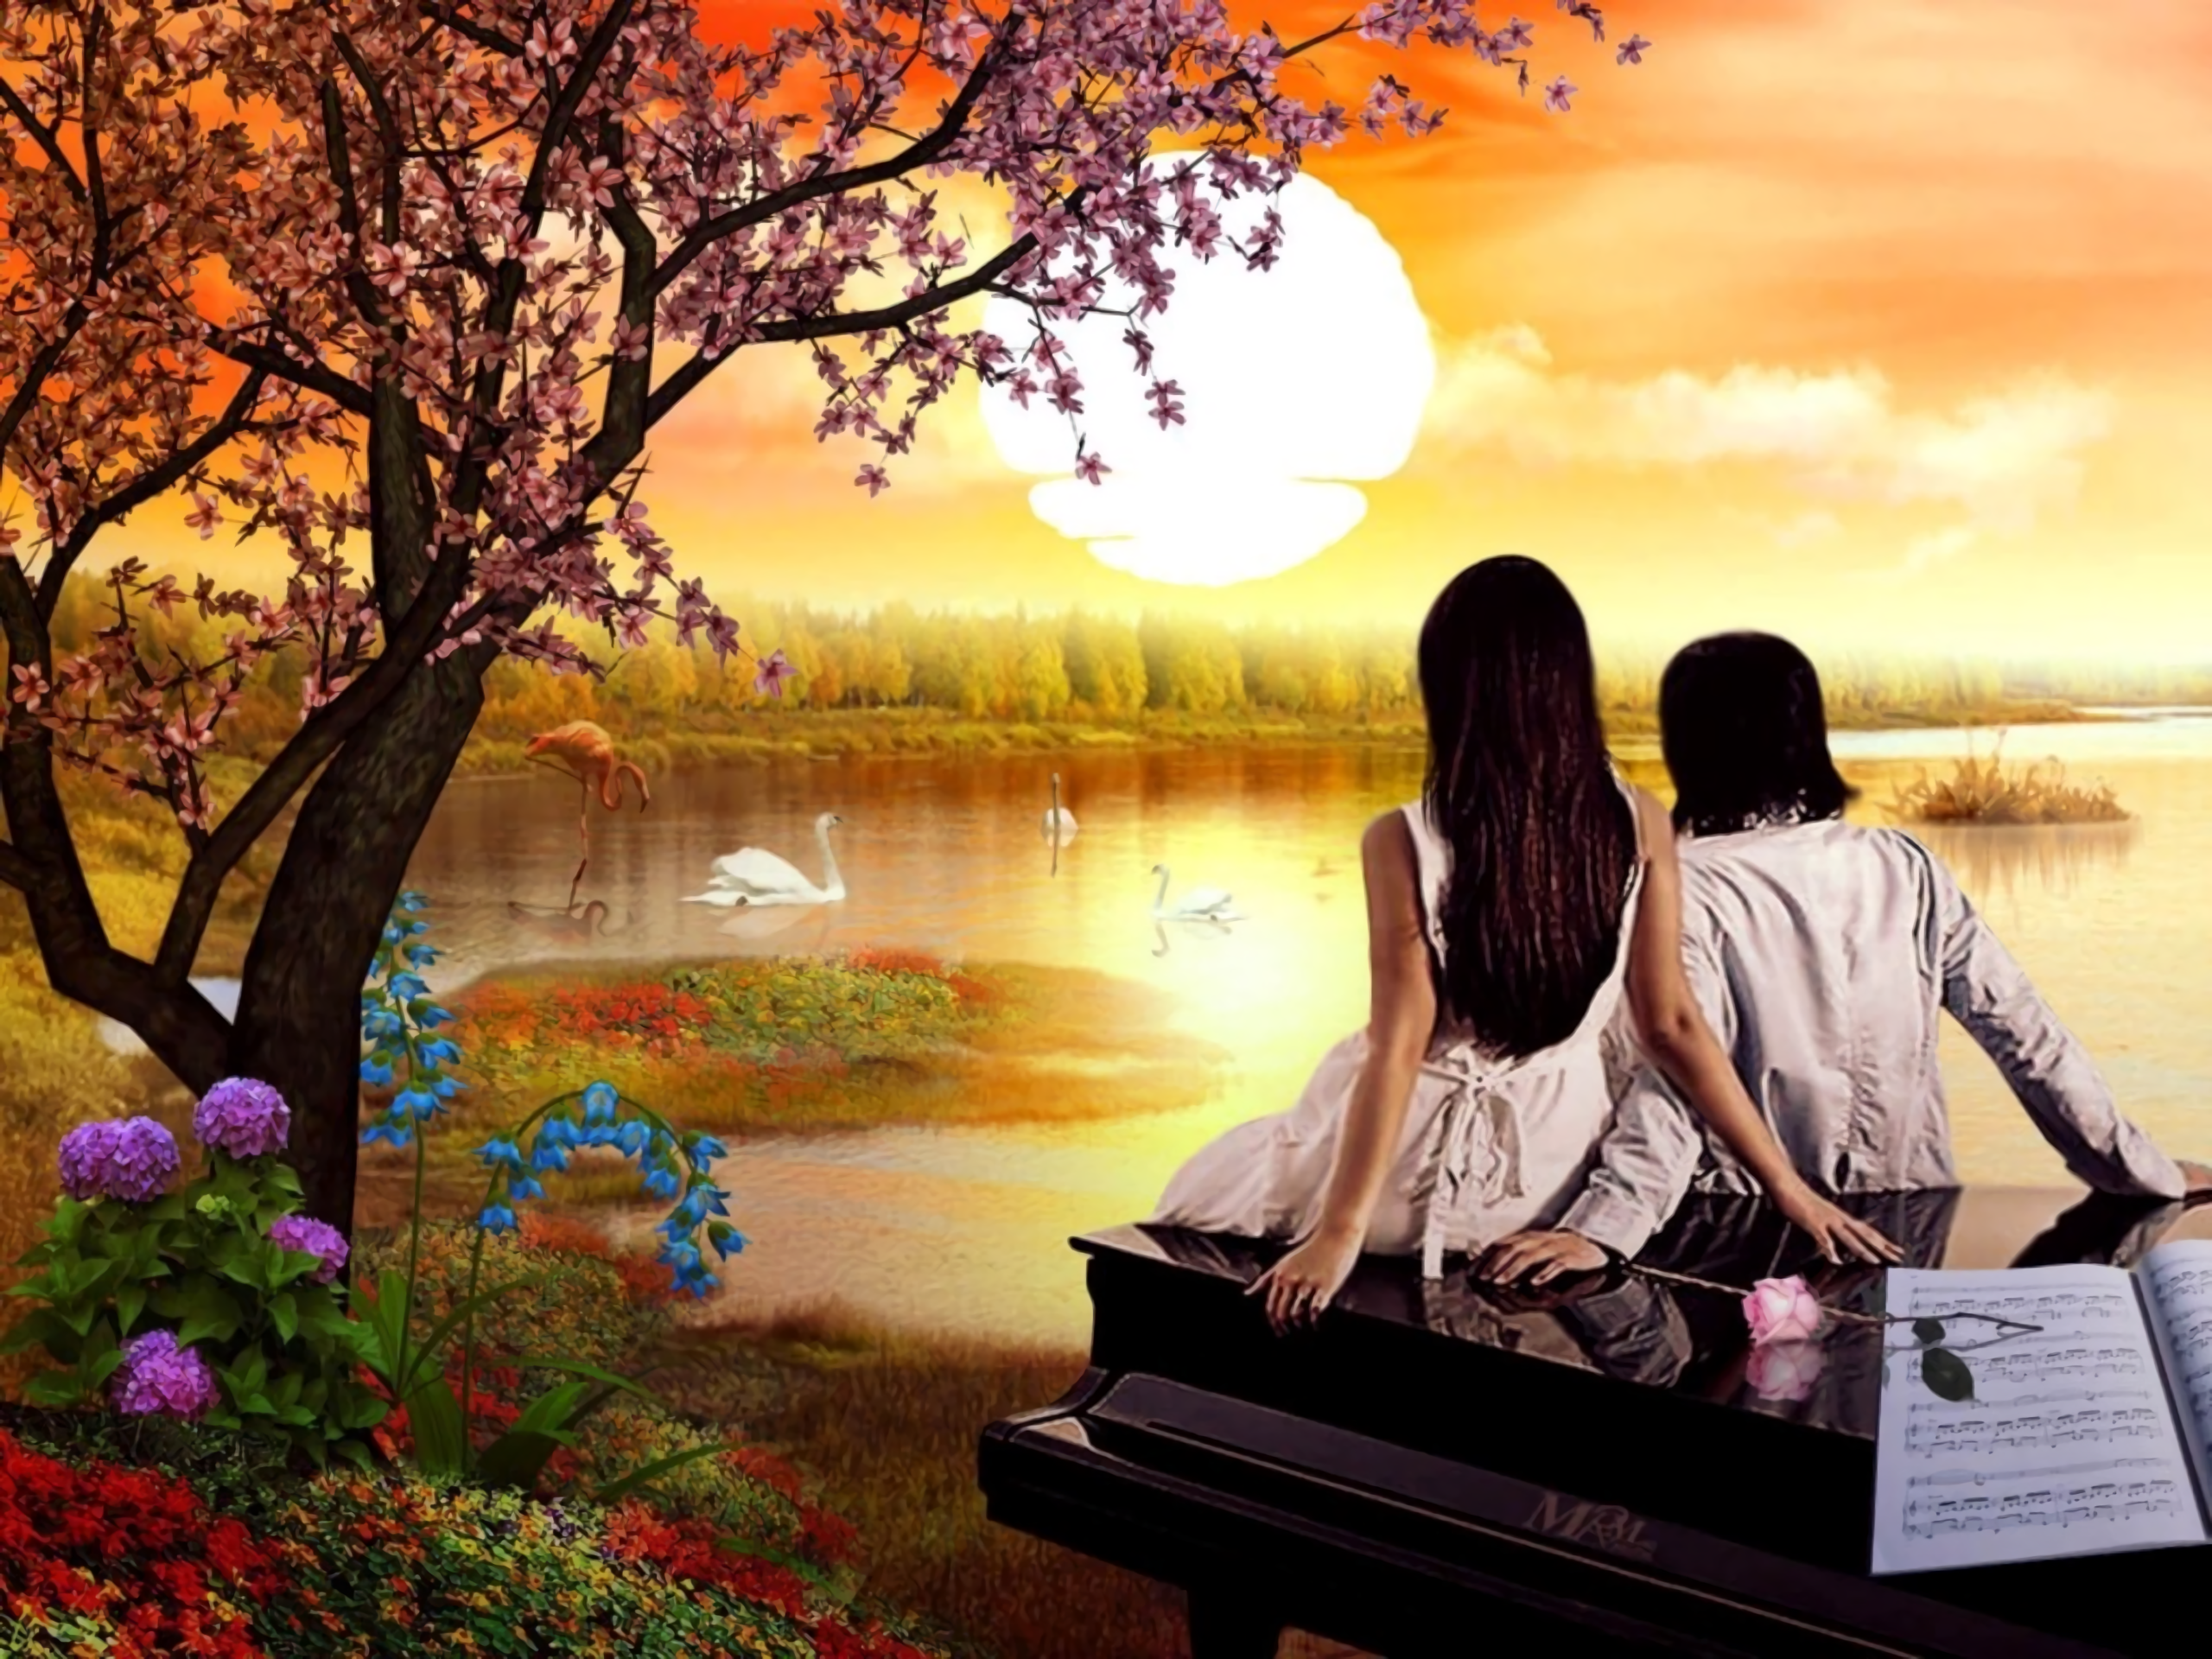 A serene sunset at a pond, featuring beautiful flowers and an artistic expression of love.